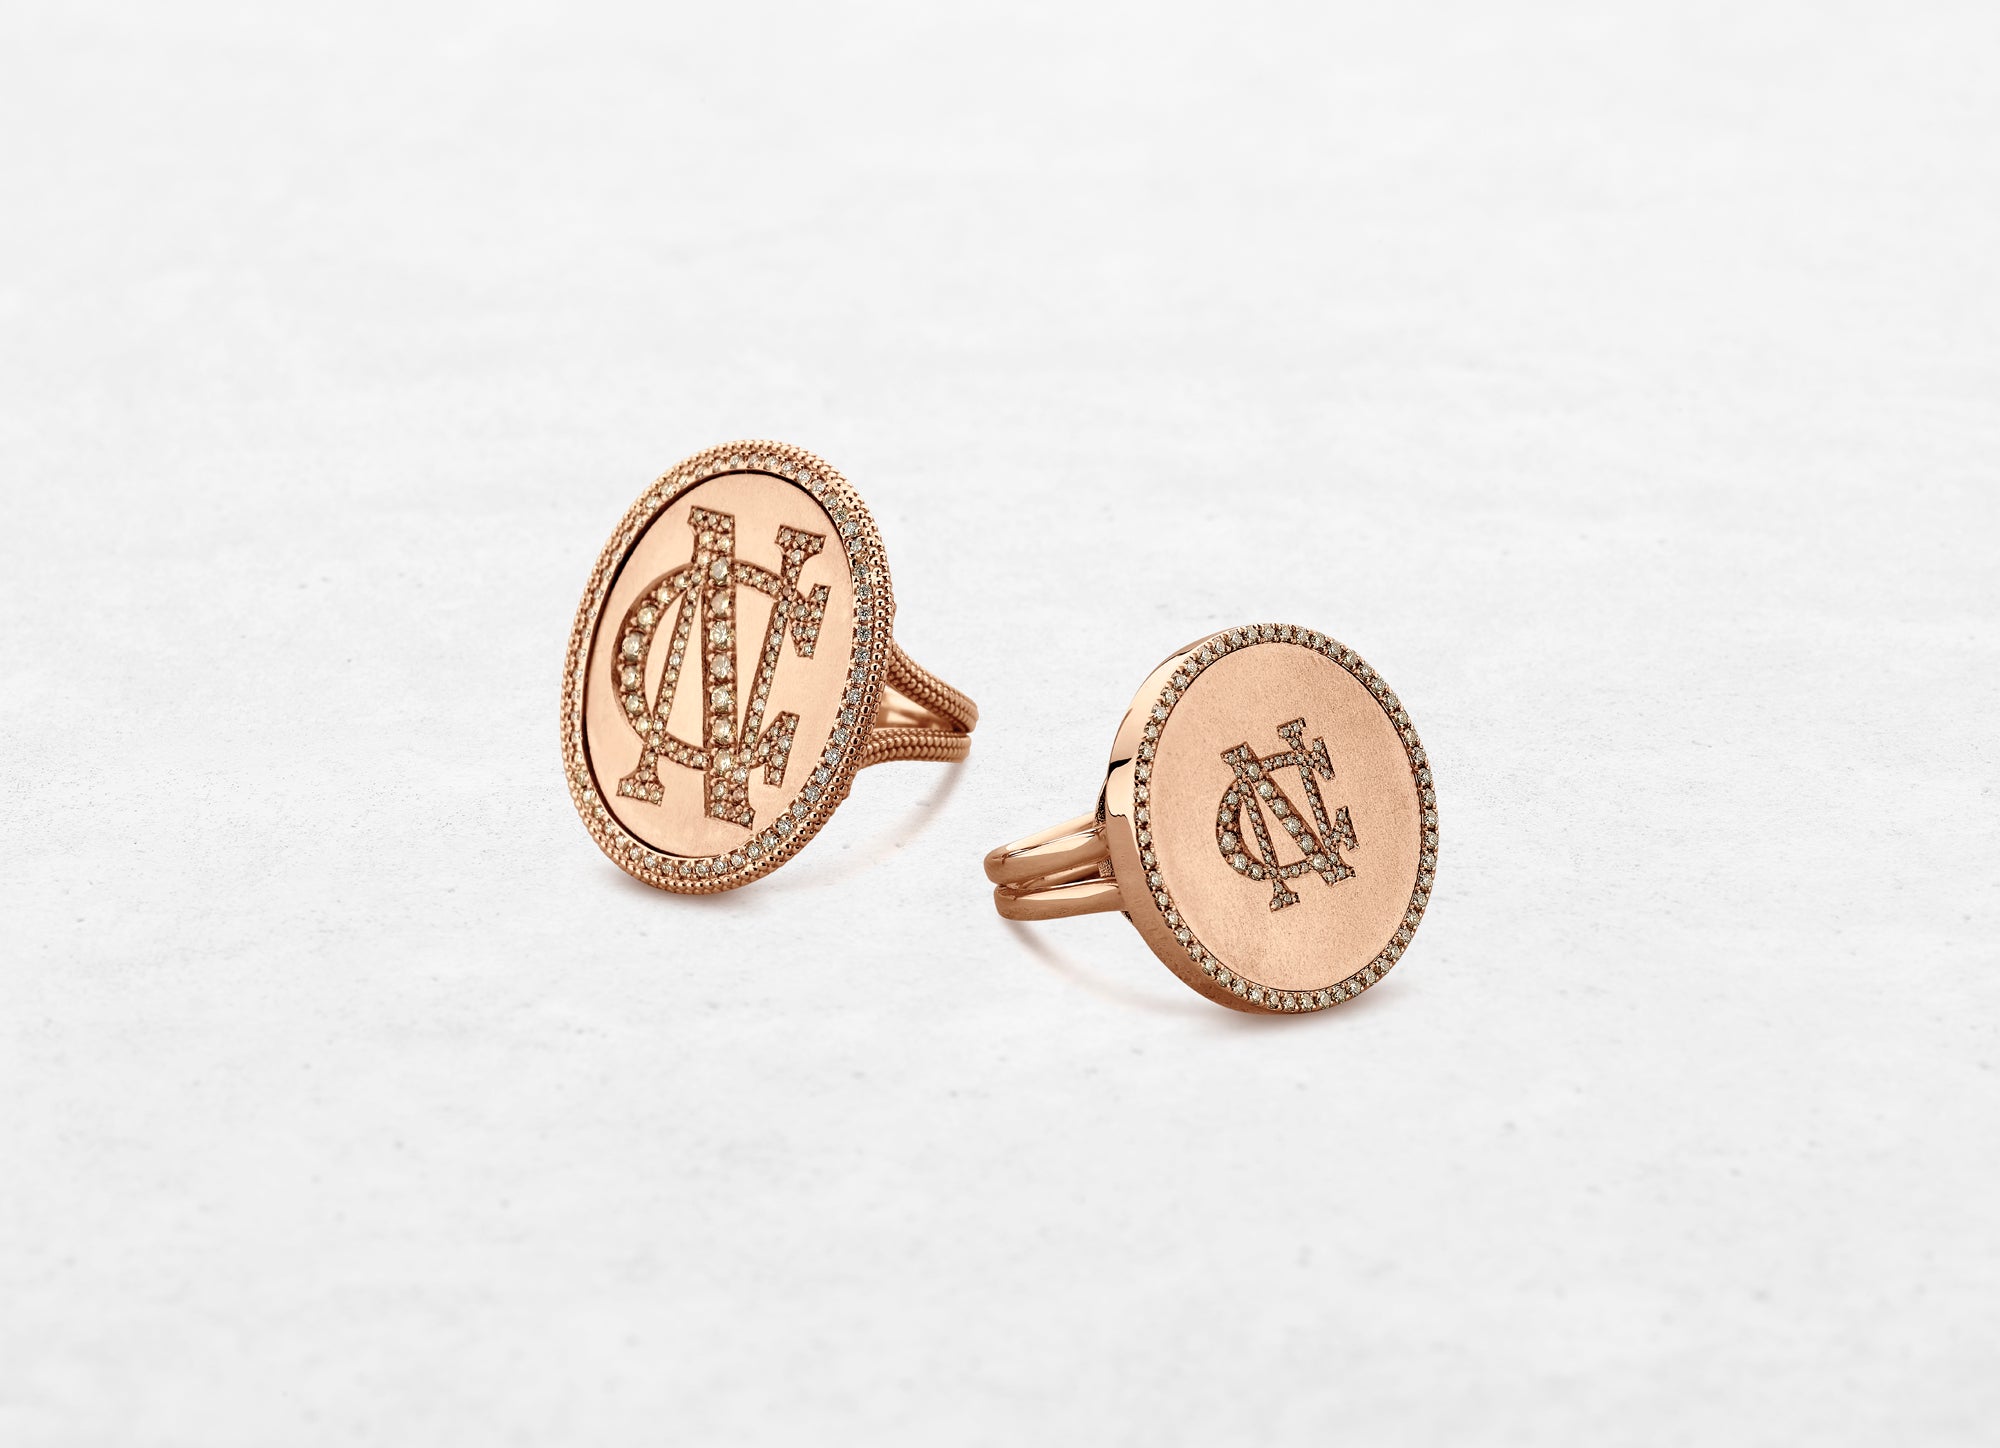 two rose gold rings with custom initials set in diamonds made by O! Jewelry